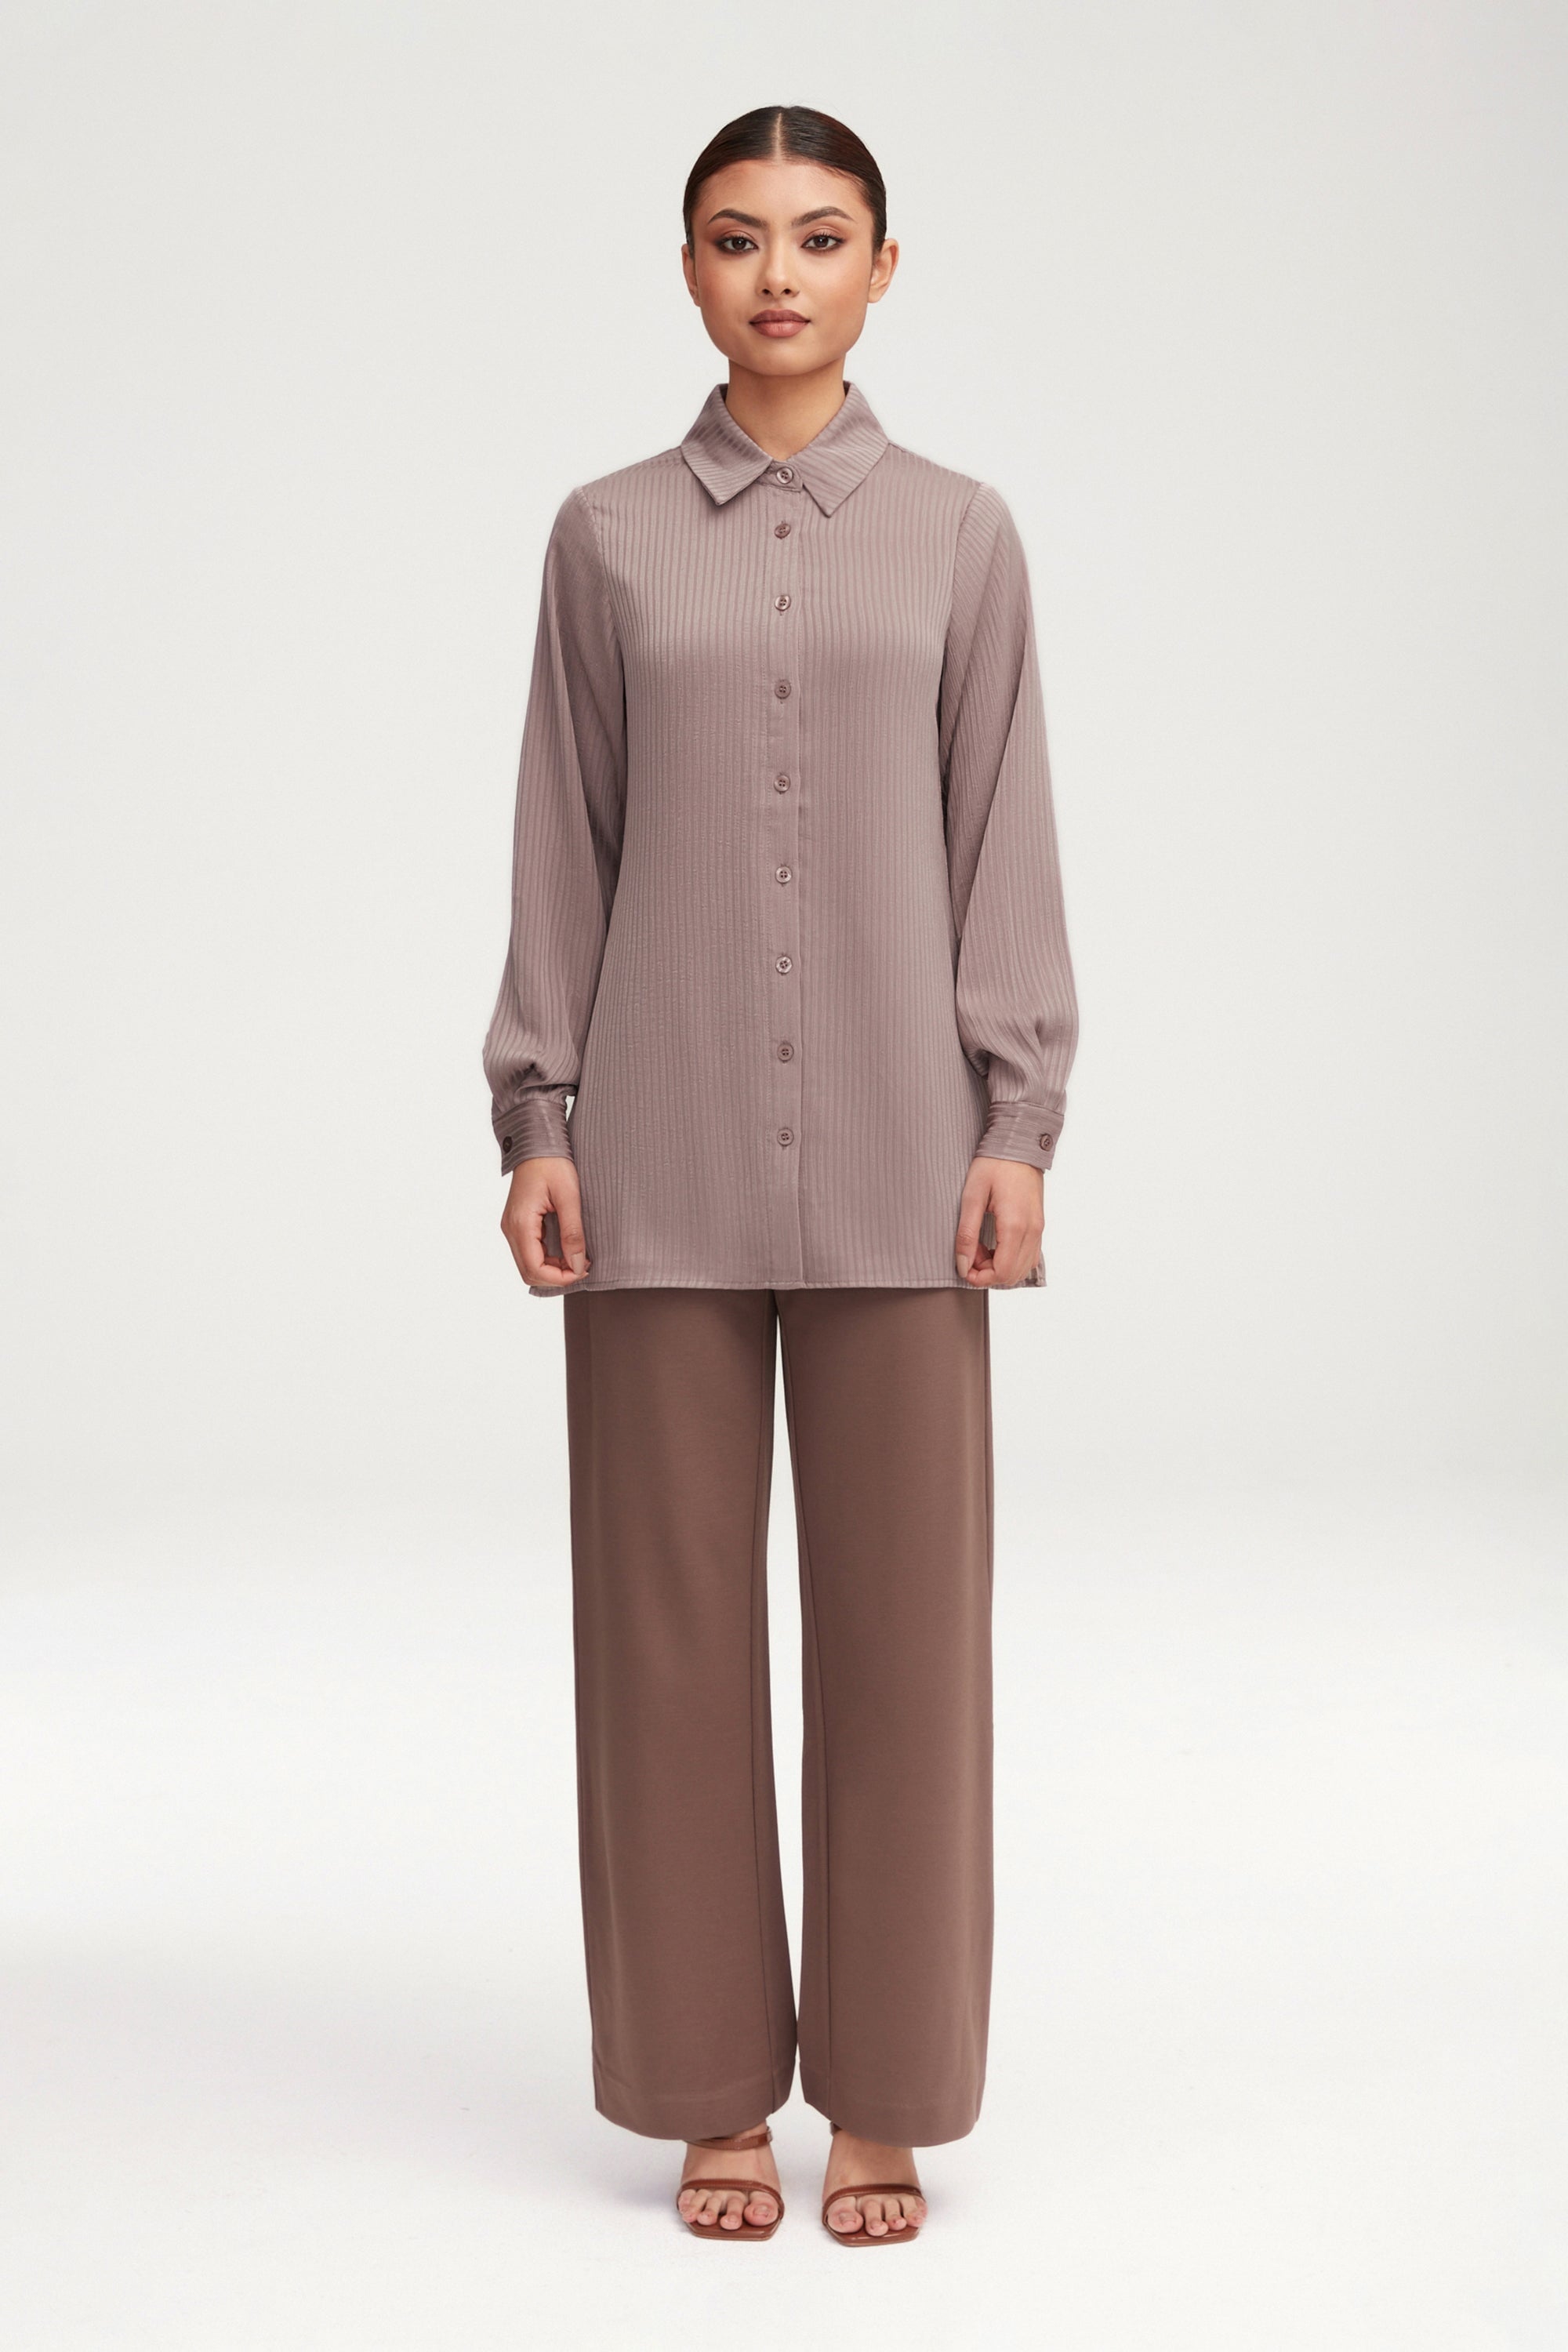 Jaserah Button Down Top - Taupe Clothing epschoolboard 